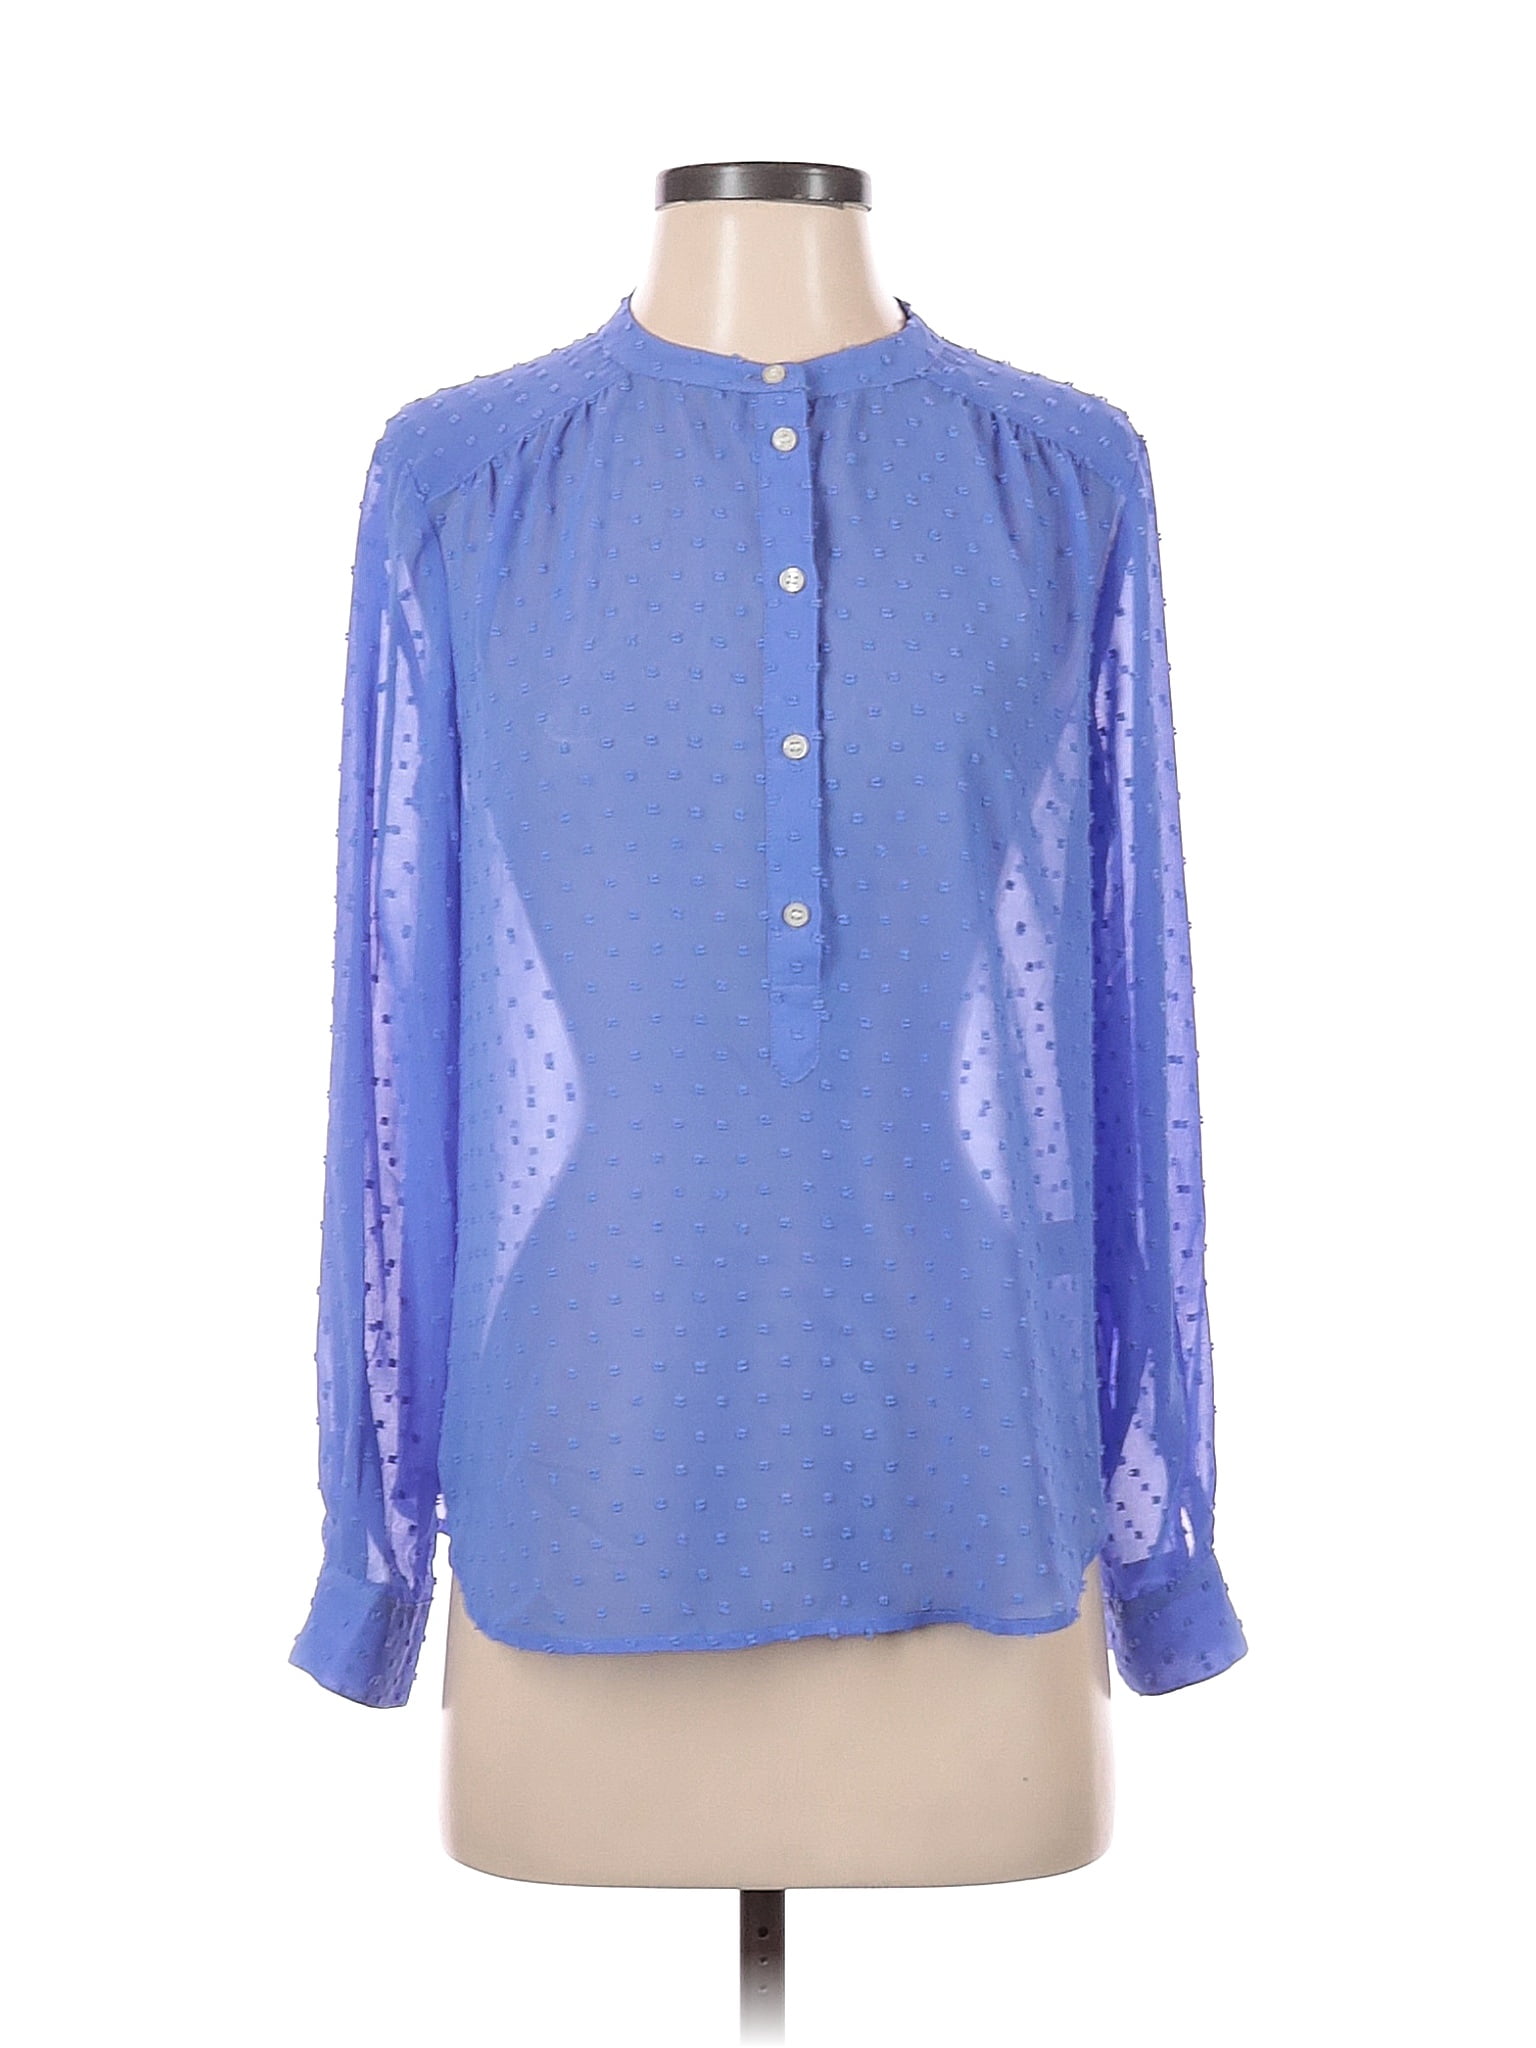 J.Crew Factory Store 100% Polyester Polka Dots Blue Long Sleeve Blouse Size  M (Petite) - 73% off